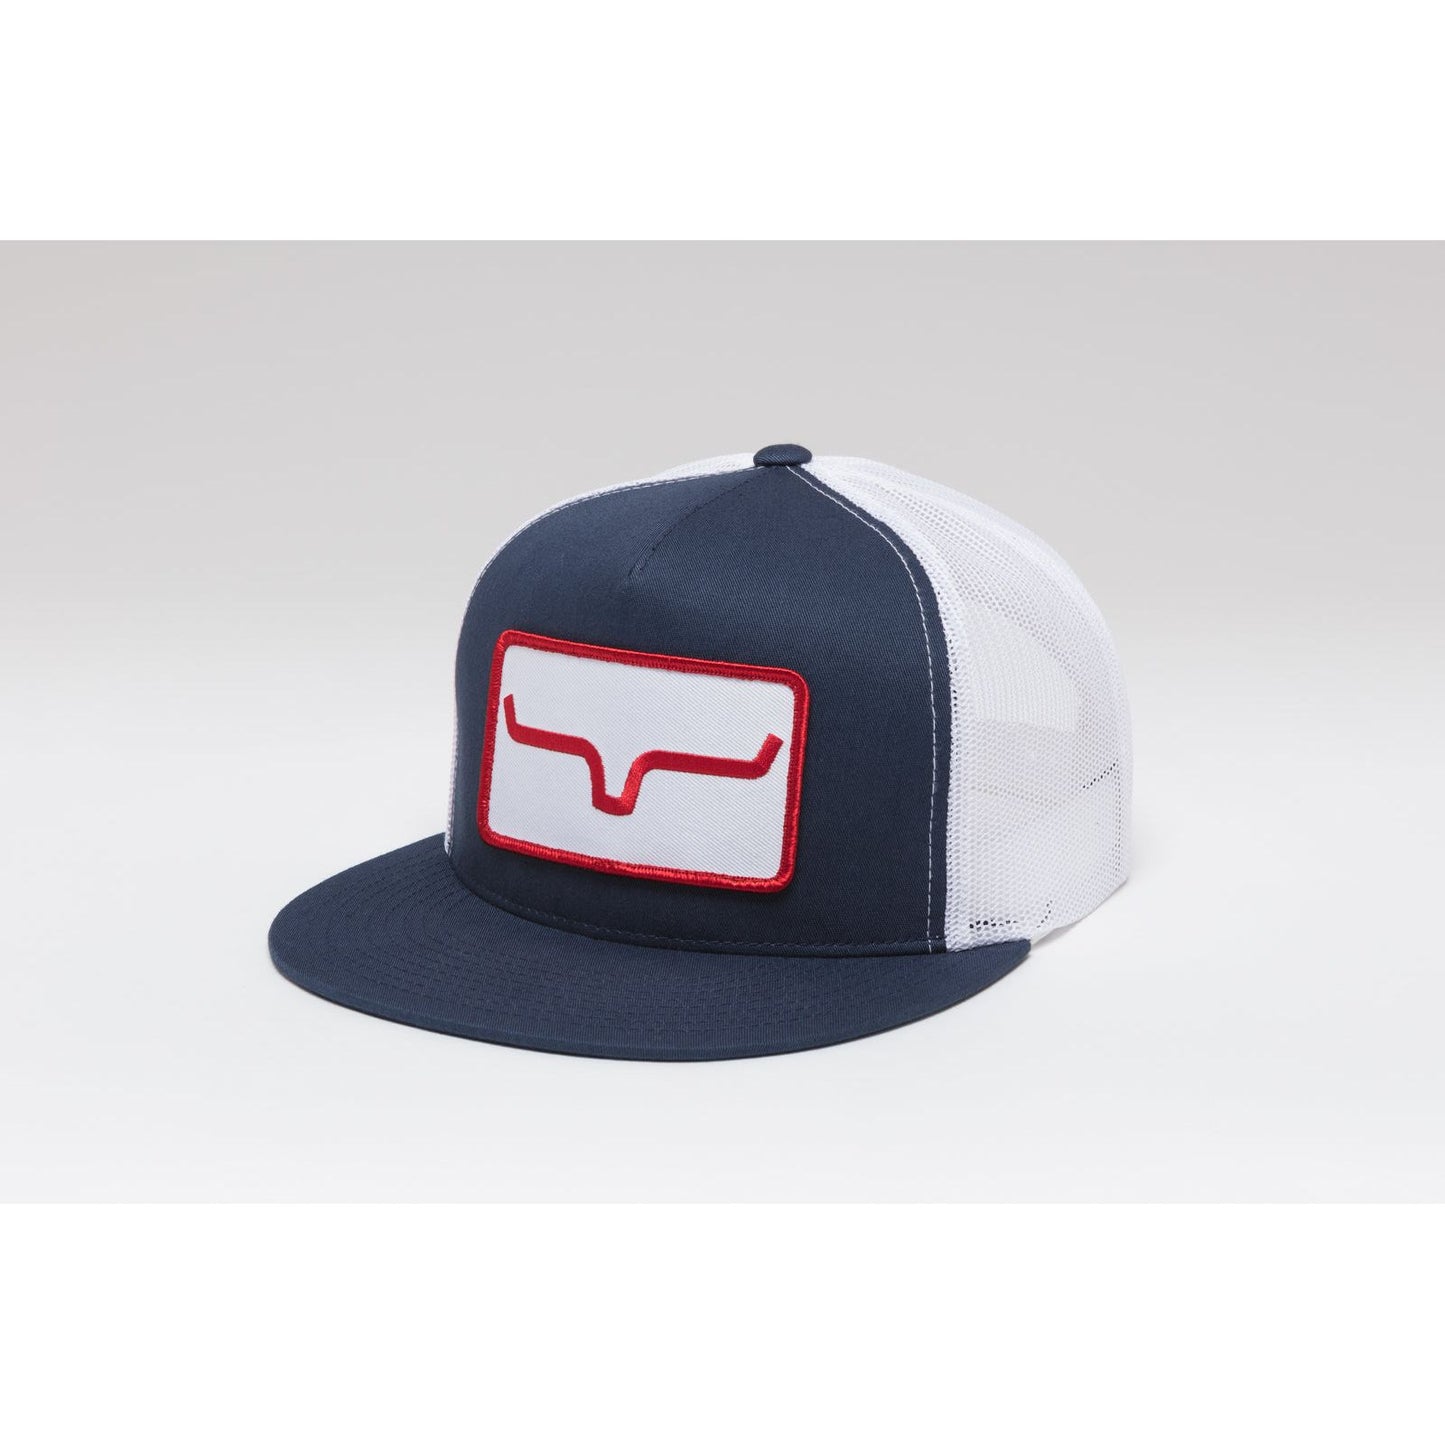 Kimes Ranch Banner Ventilated Hat Navy/White